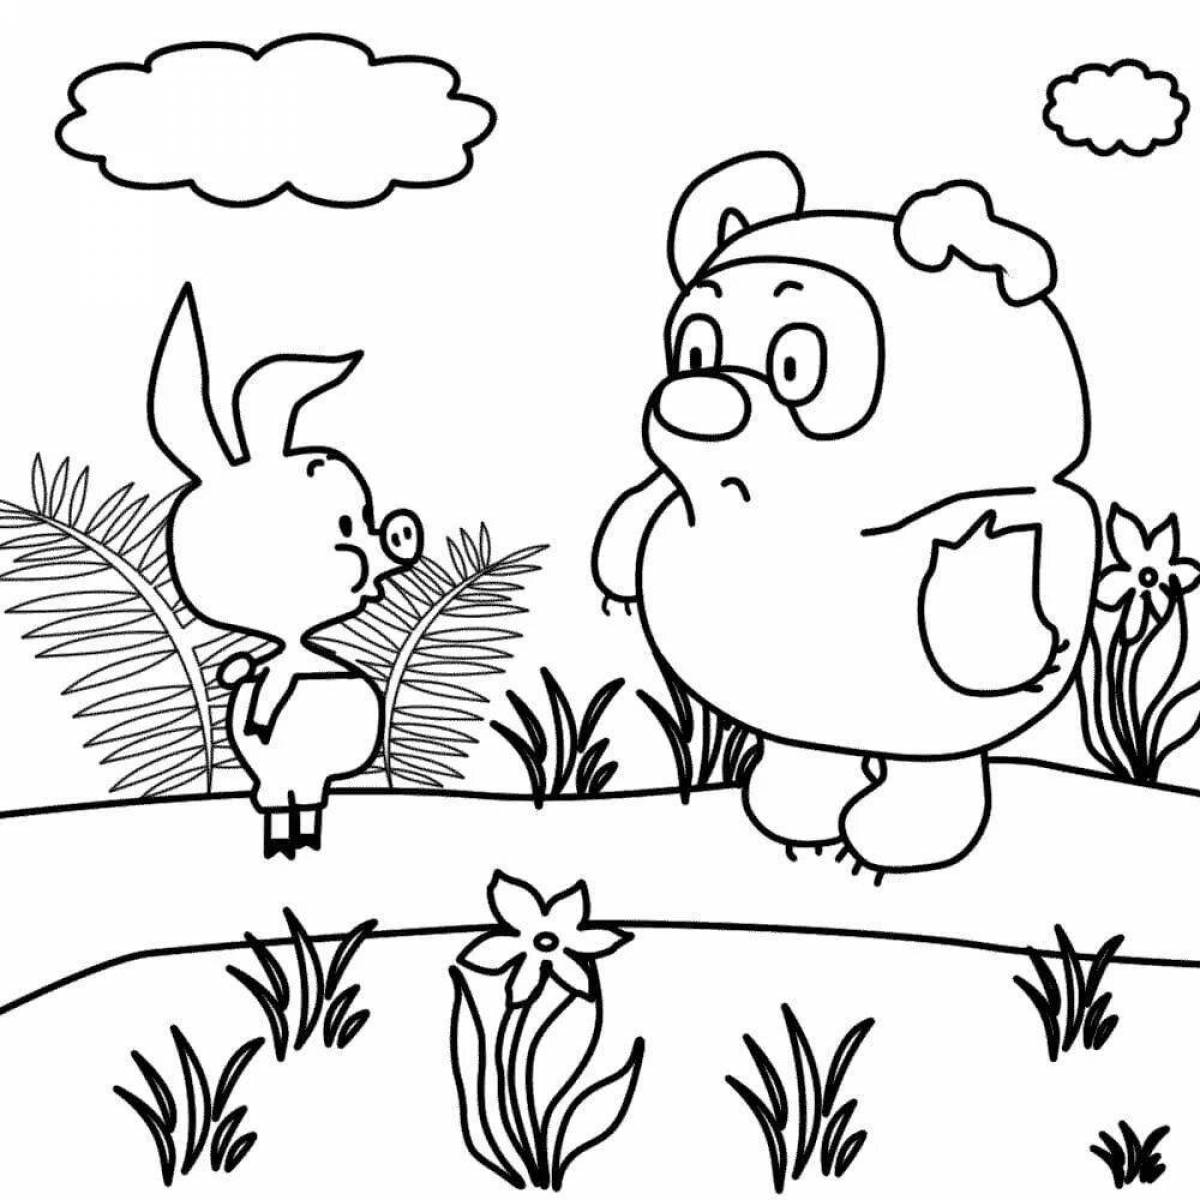 Playful coloring pdf for the little ones